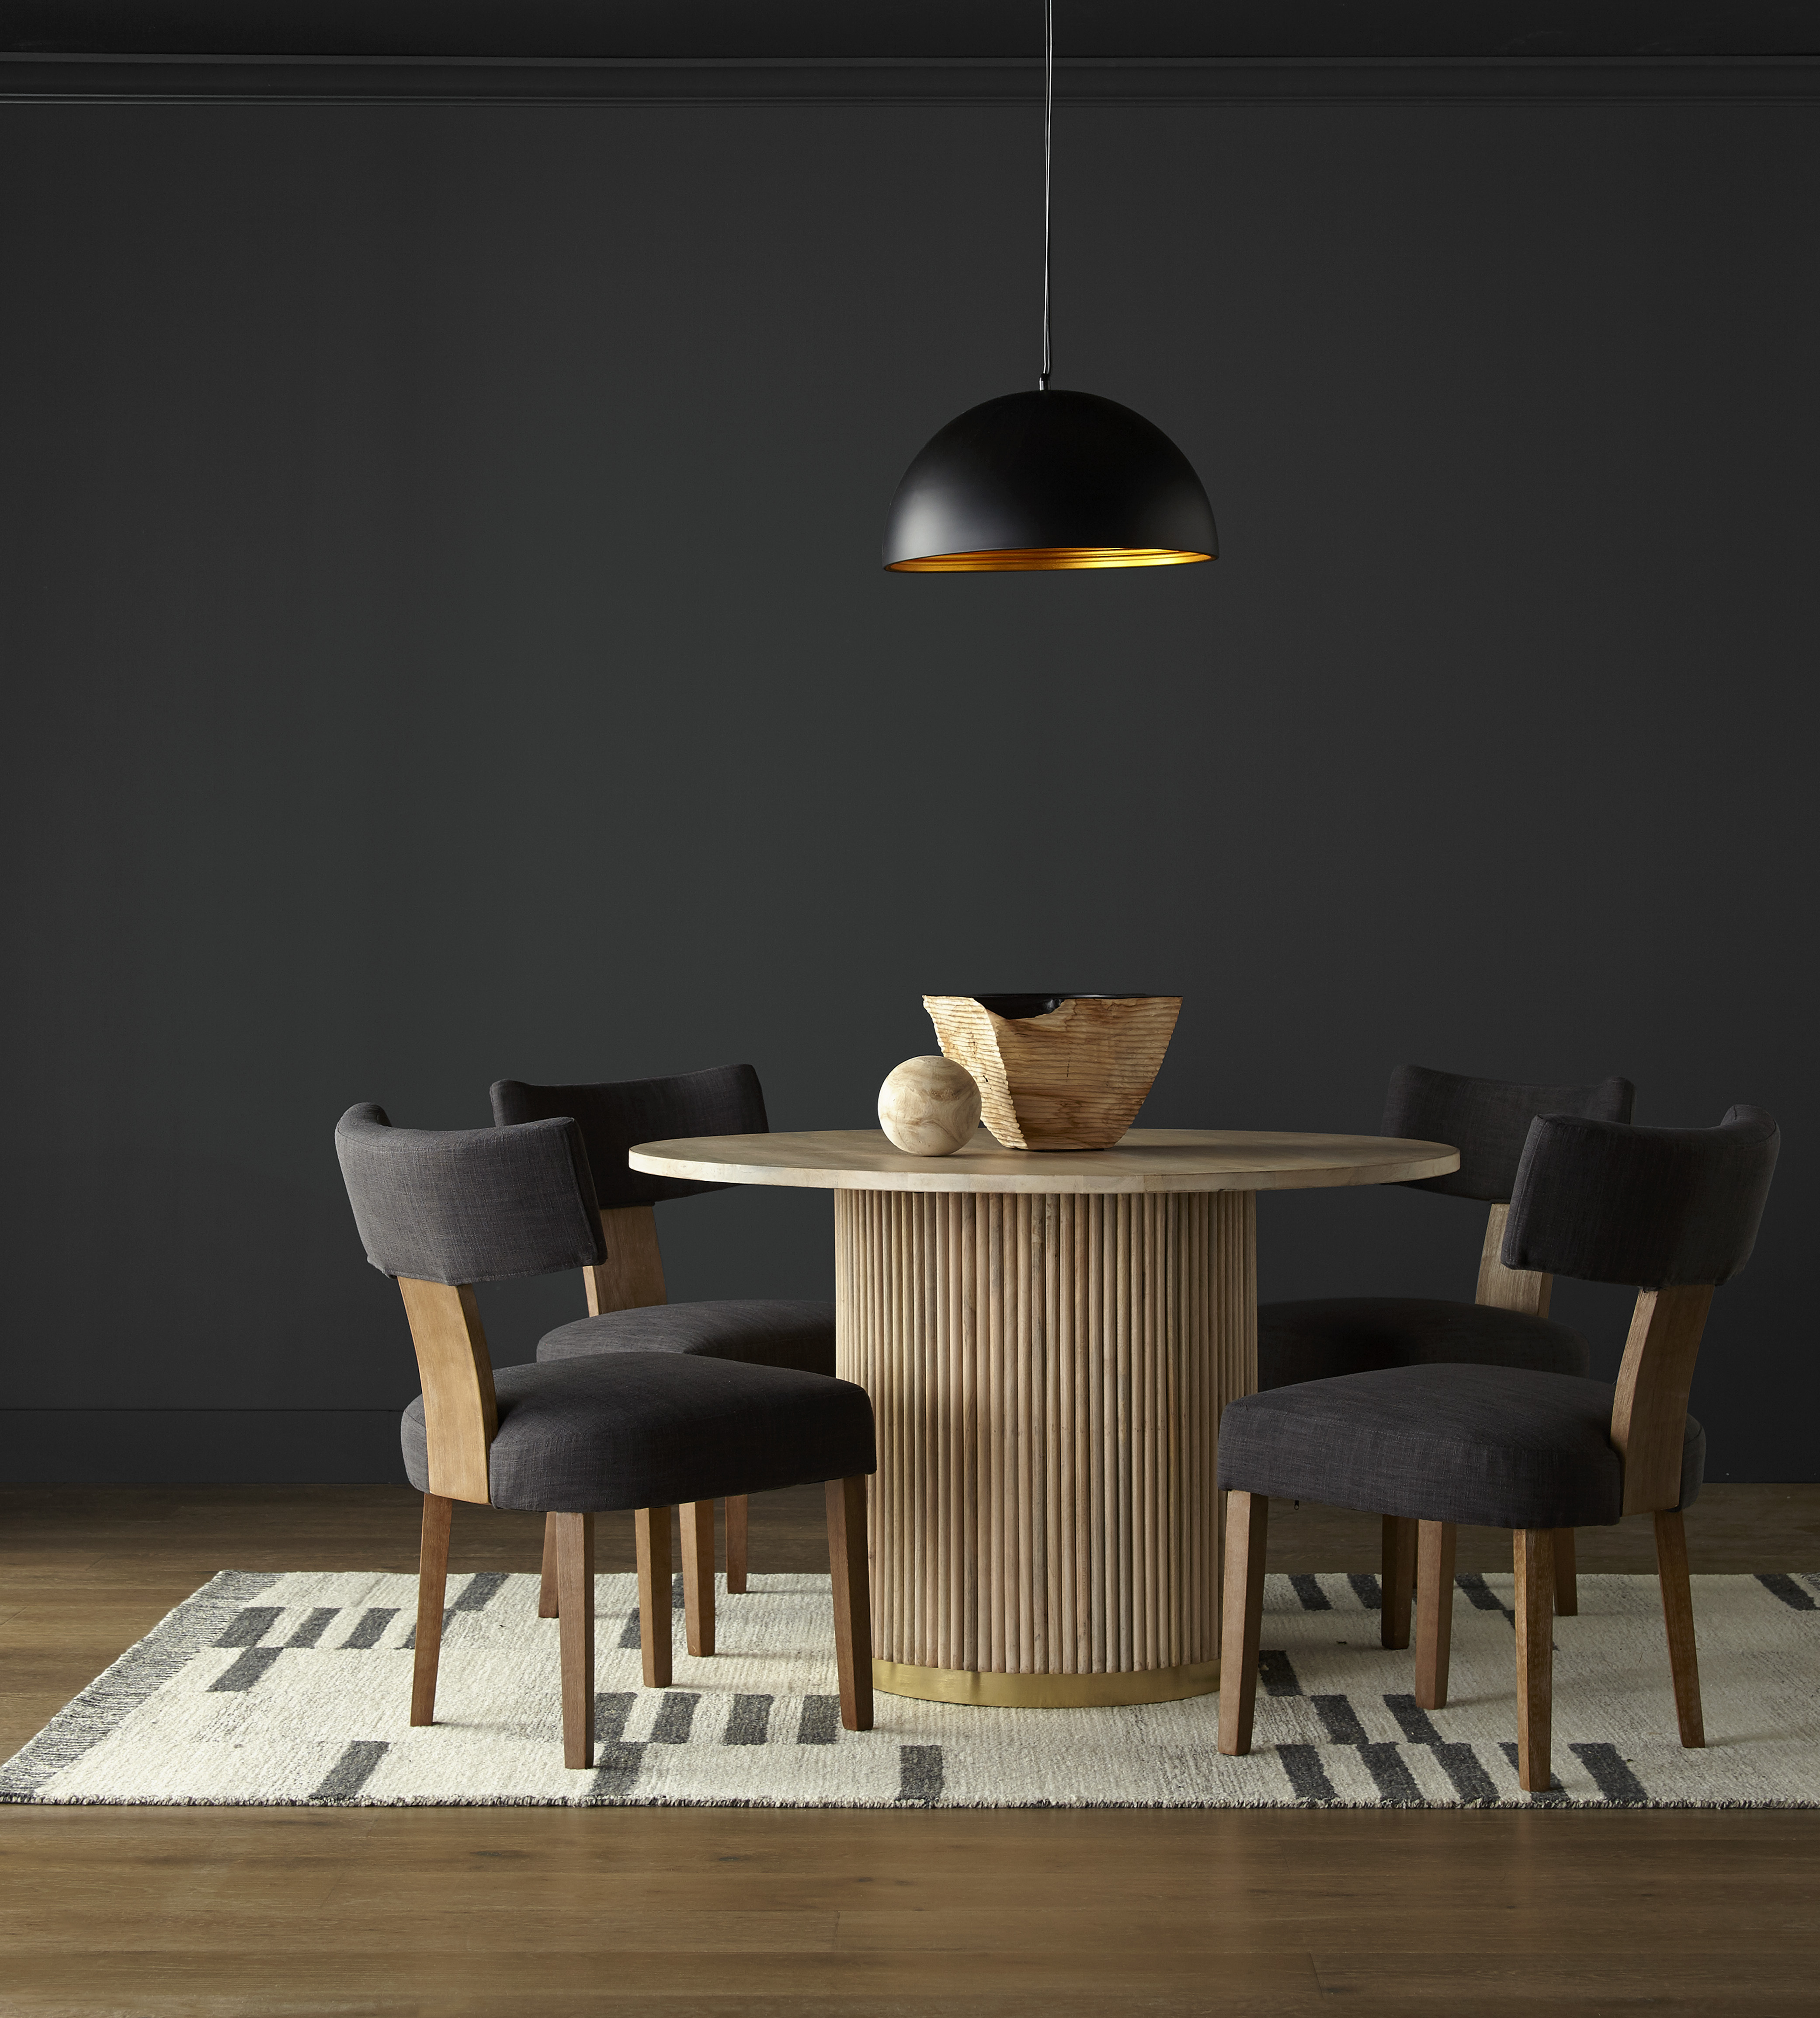 A simple and elegant dining room with walls in the colour Cracked Pepper, styled with a hanging black pendant light fixture